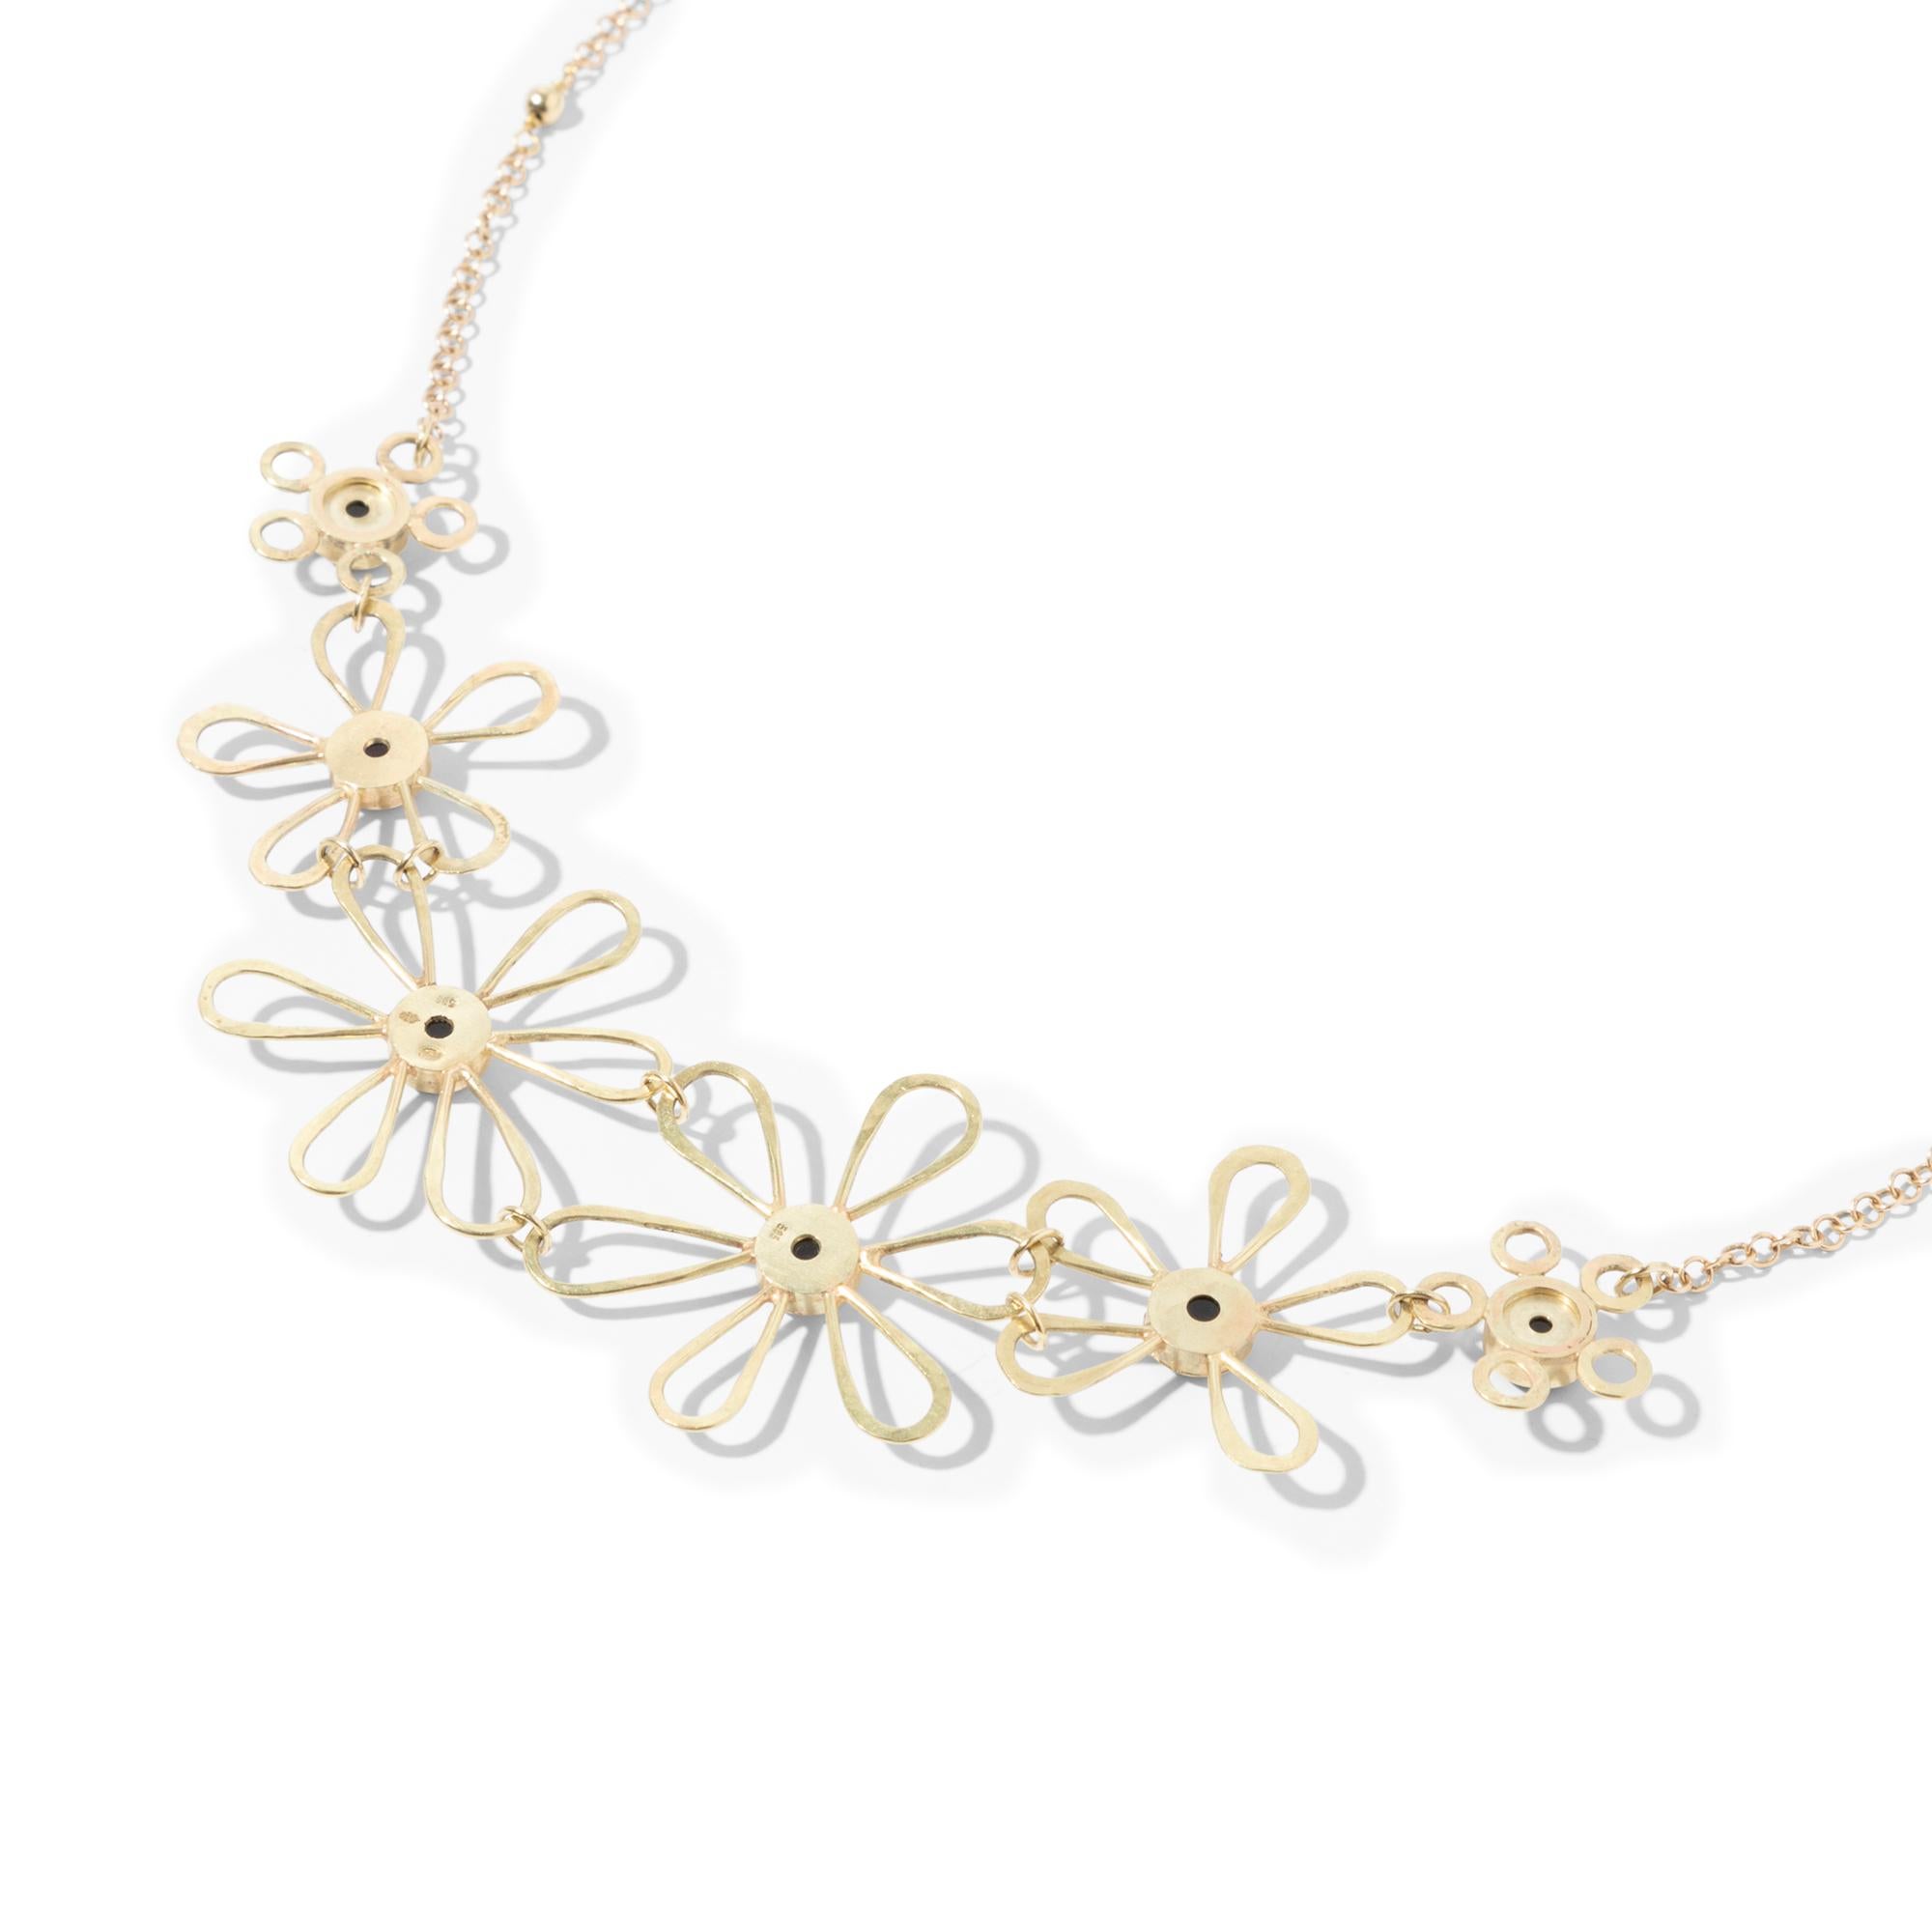 Playful and light. This handcrafted 14k gold necklace sits comfortably around the neck like a garland of daisies. The six flowers are assembled to allow maximum movement and the hearts consist of doublet opals. An extra eye at the end of the chain